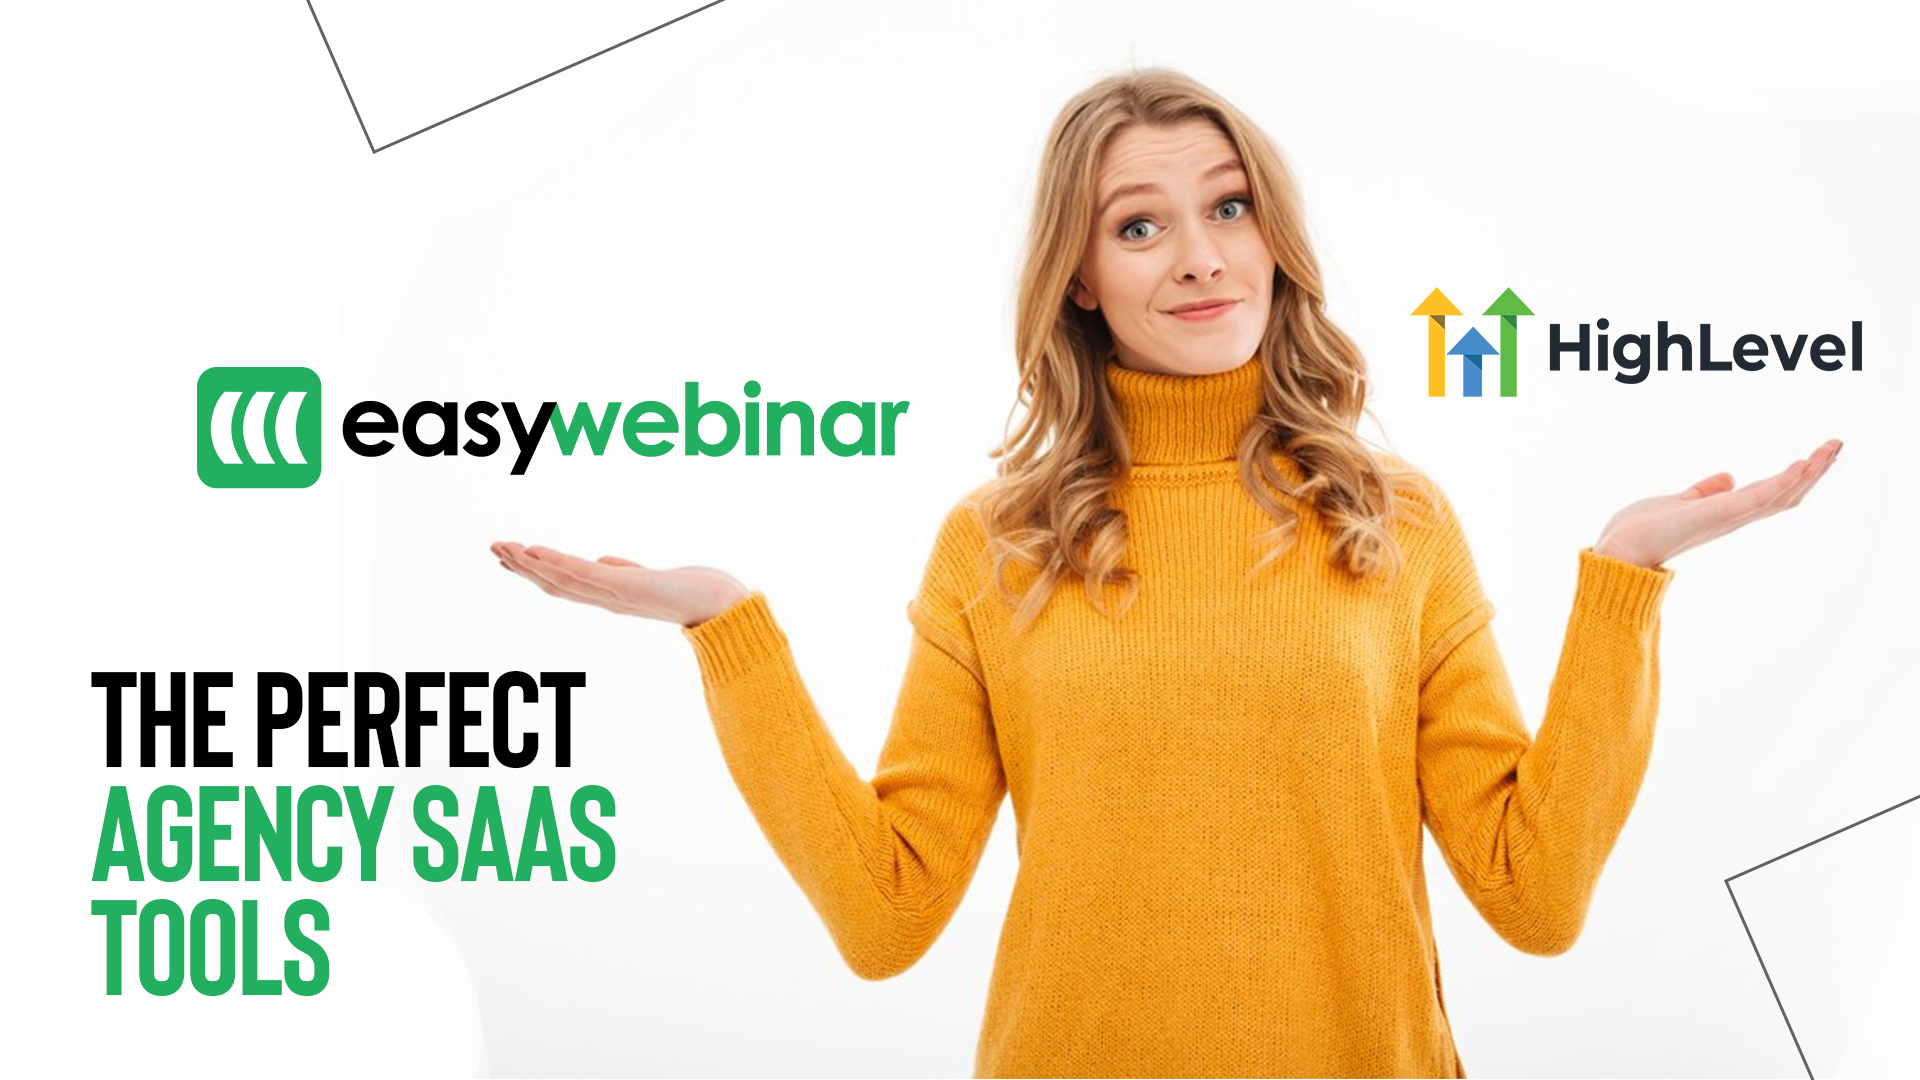 EasyWebinar integrates with GoHighLevel